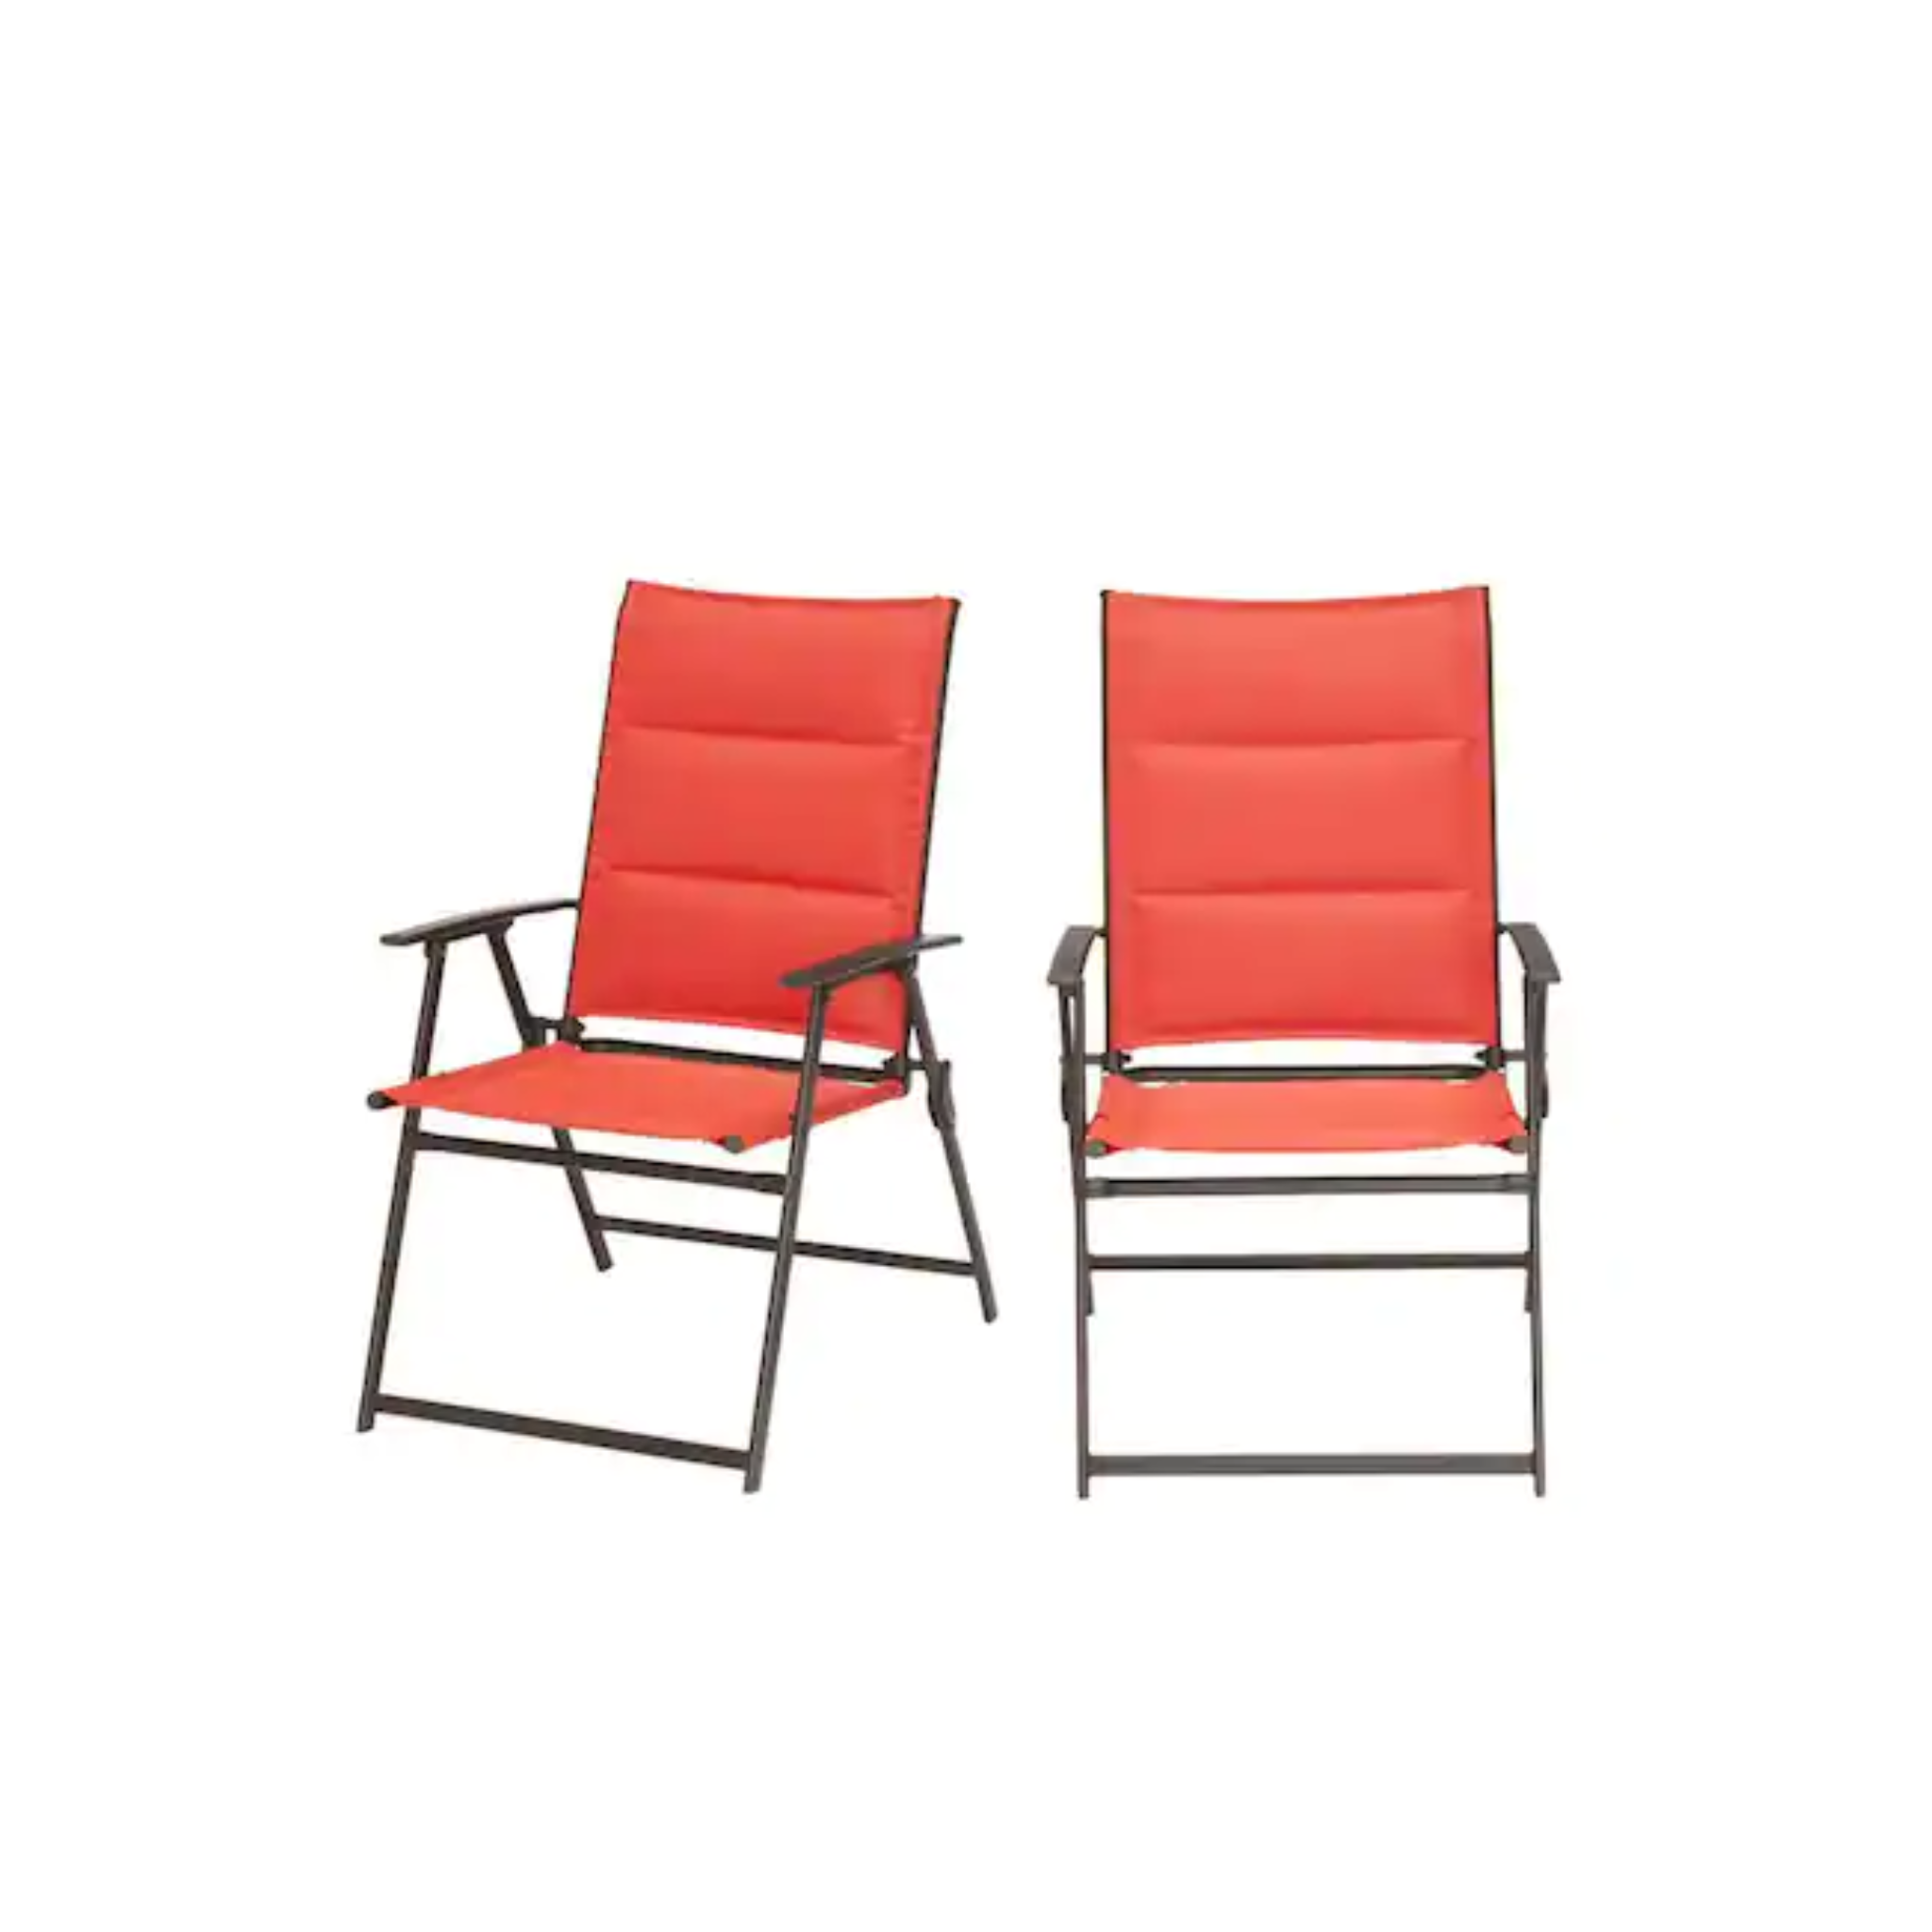 Set of 2 StyleWell Steel Padded Sling Folding Outdoor Patio Dining Chairs